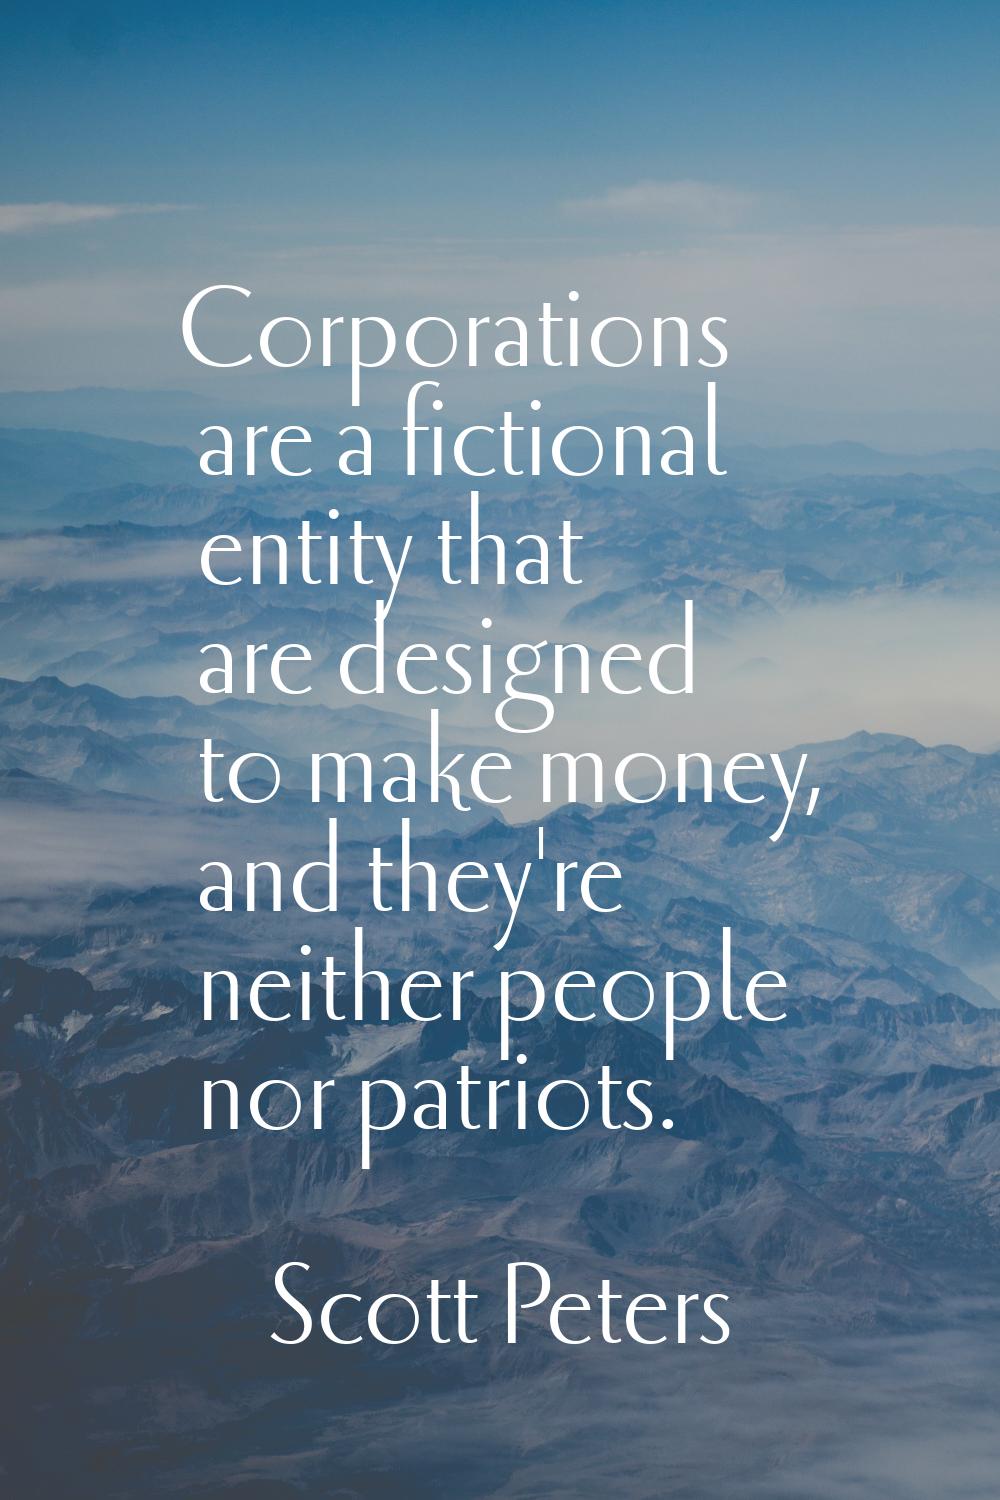 Corporations are a fictional entity that are designed to make money, and they're neither people nor